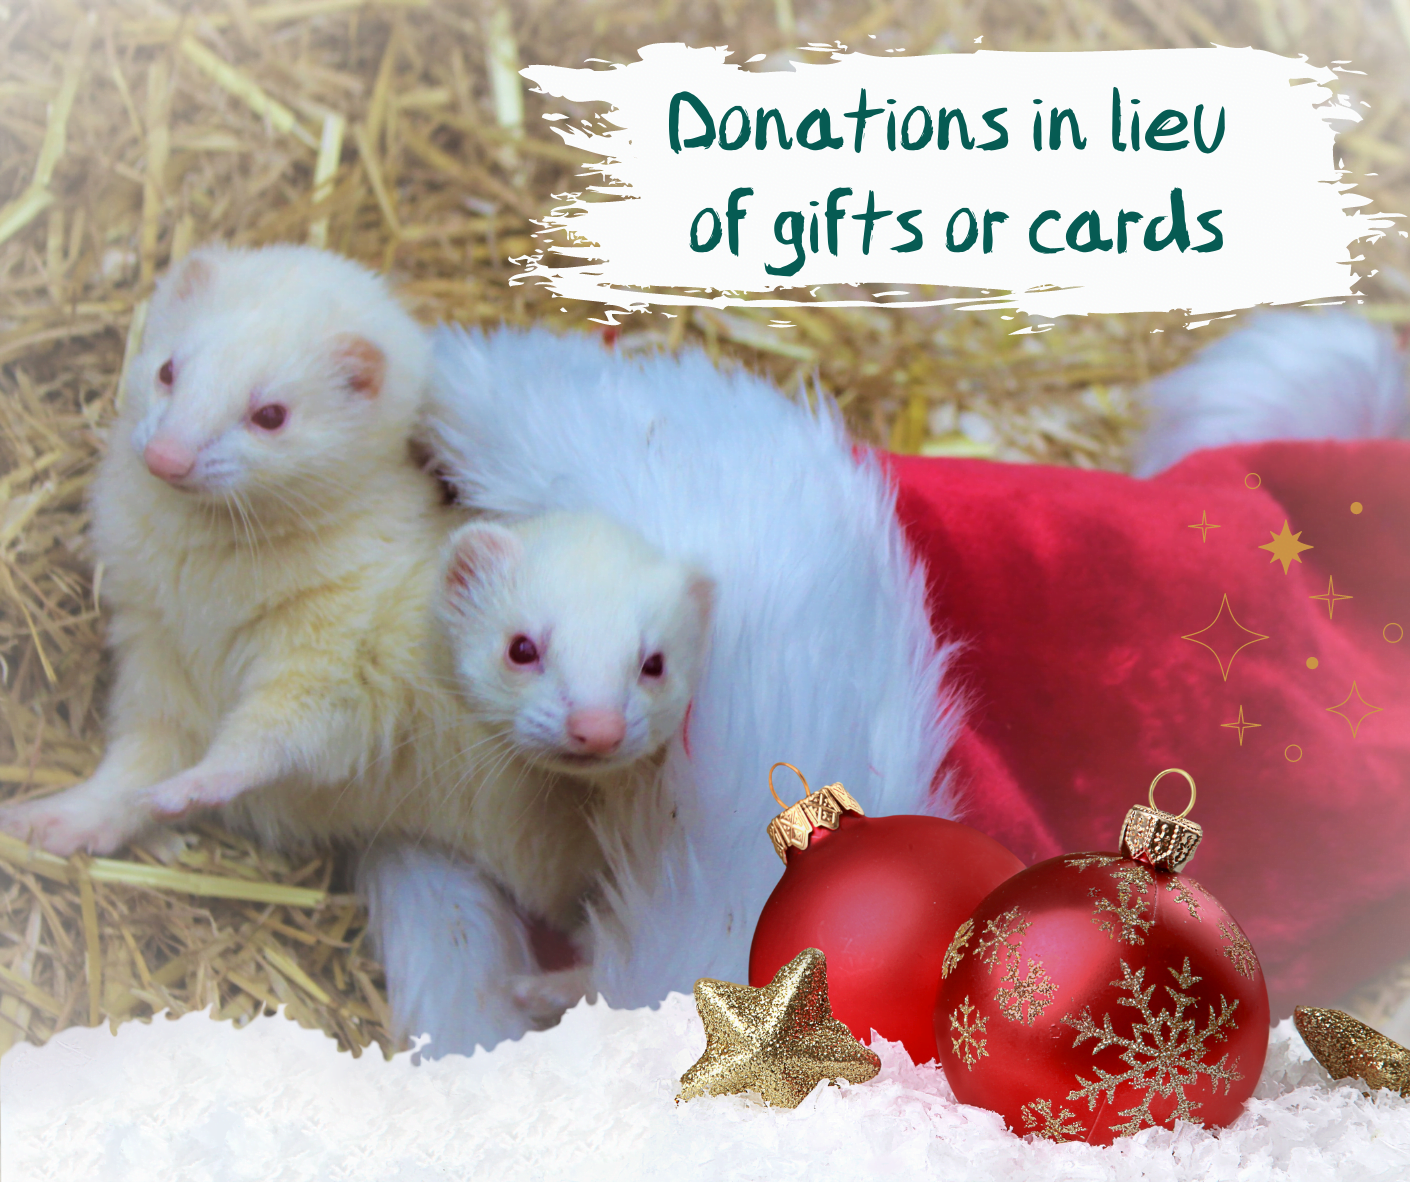 Donations in lieu of gifts or cards